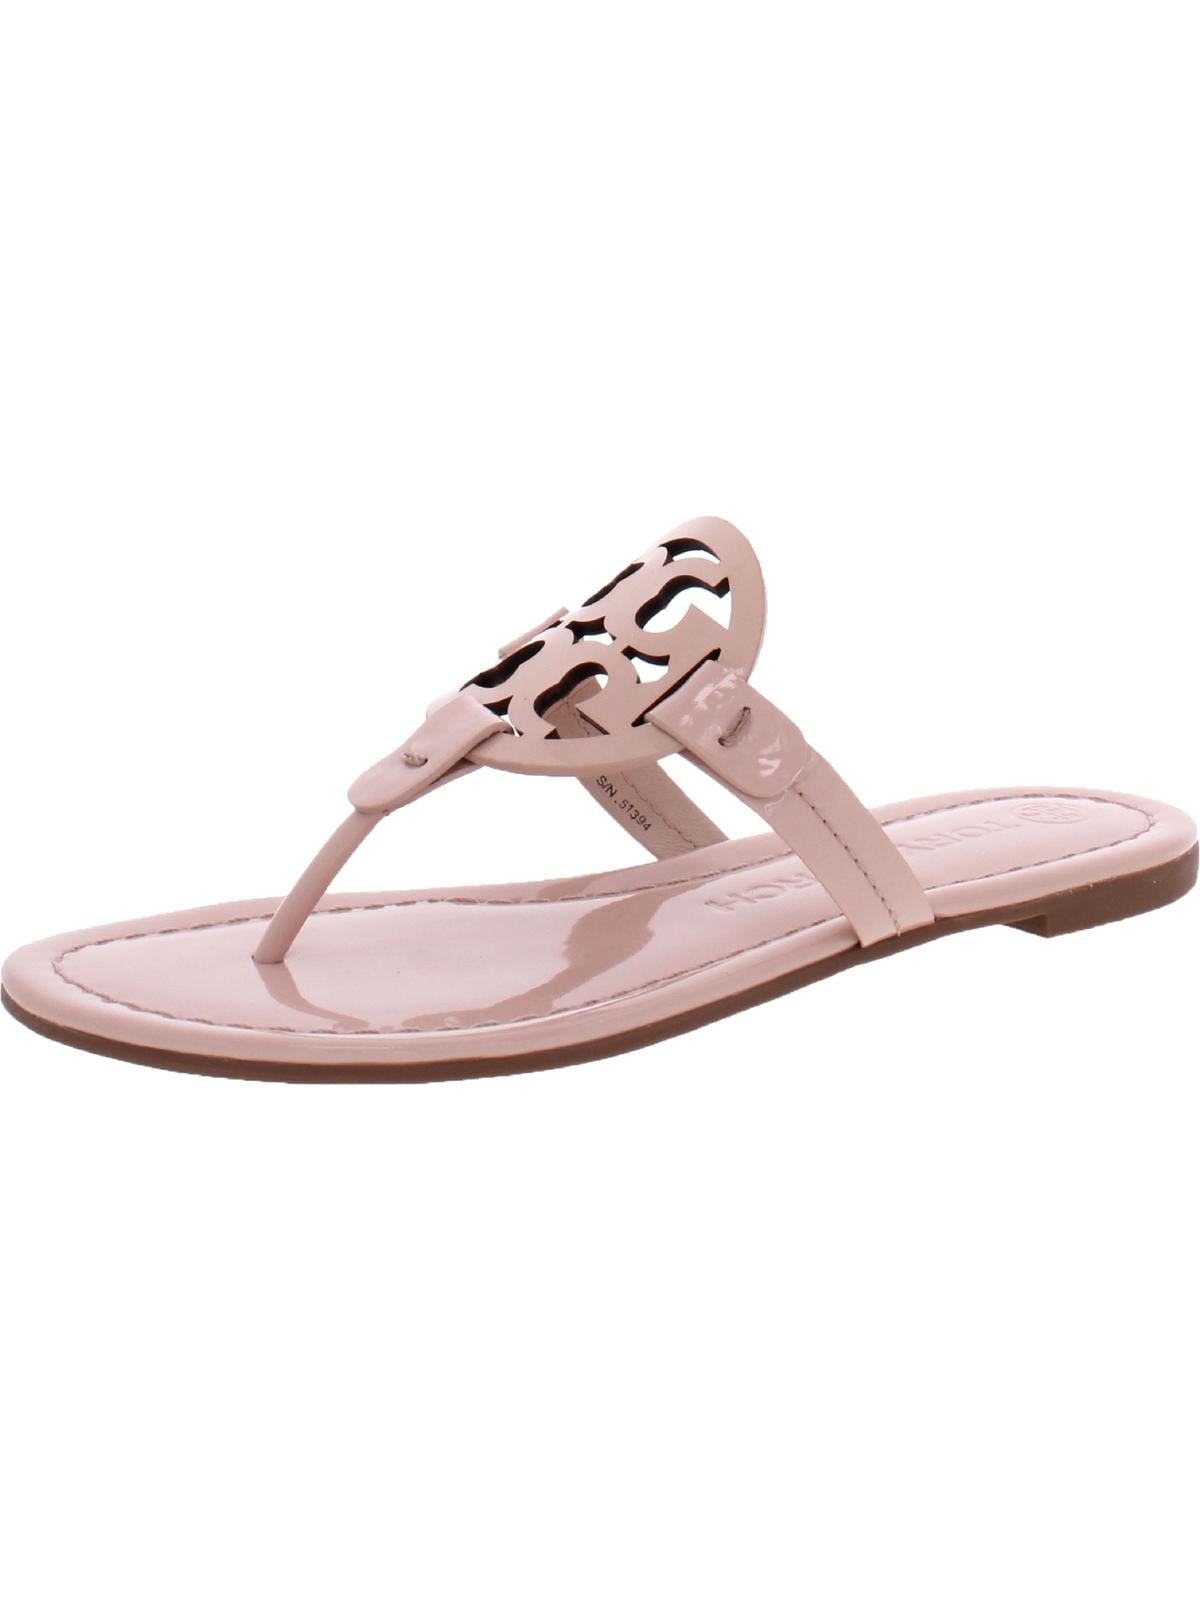 Tory Burch Womens Miller Leather T-Strap Thong Sandals 